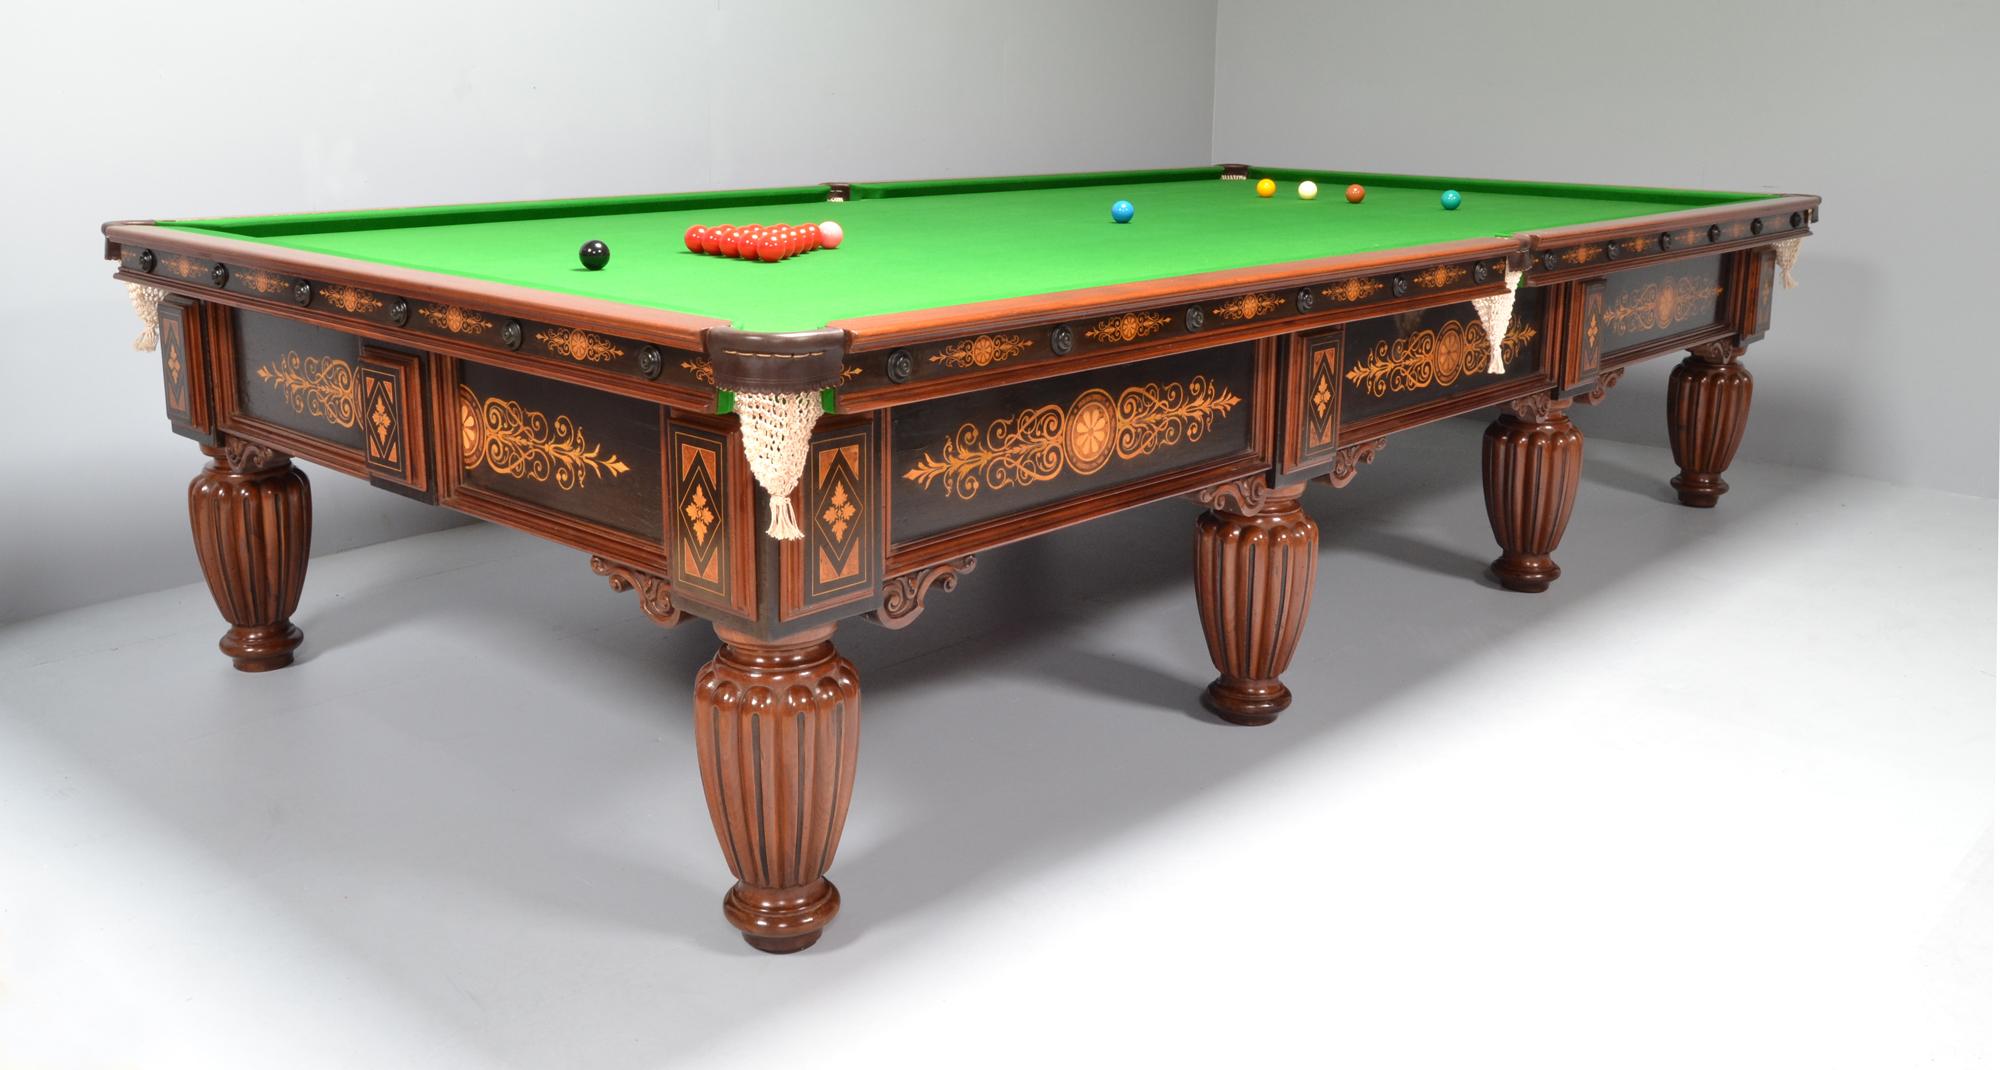 A fabulous full size 12ft x 6ft mahogany and ebony marquetry billiard table, English circa 1875.

The side frame is embellished with decorative marquetry roundels and flowing symmetrical fauna of Boxwood and Amboyna, the cushions sides follow this